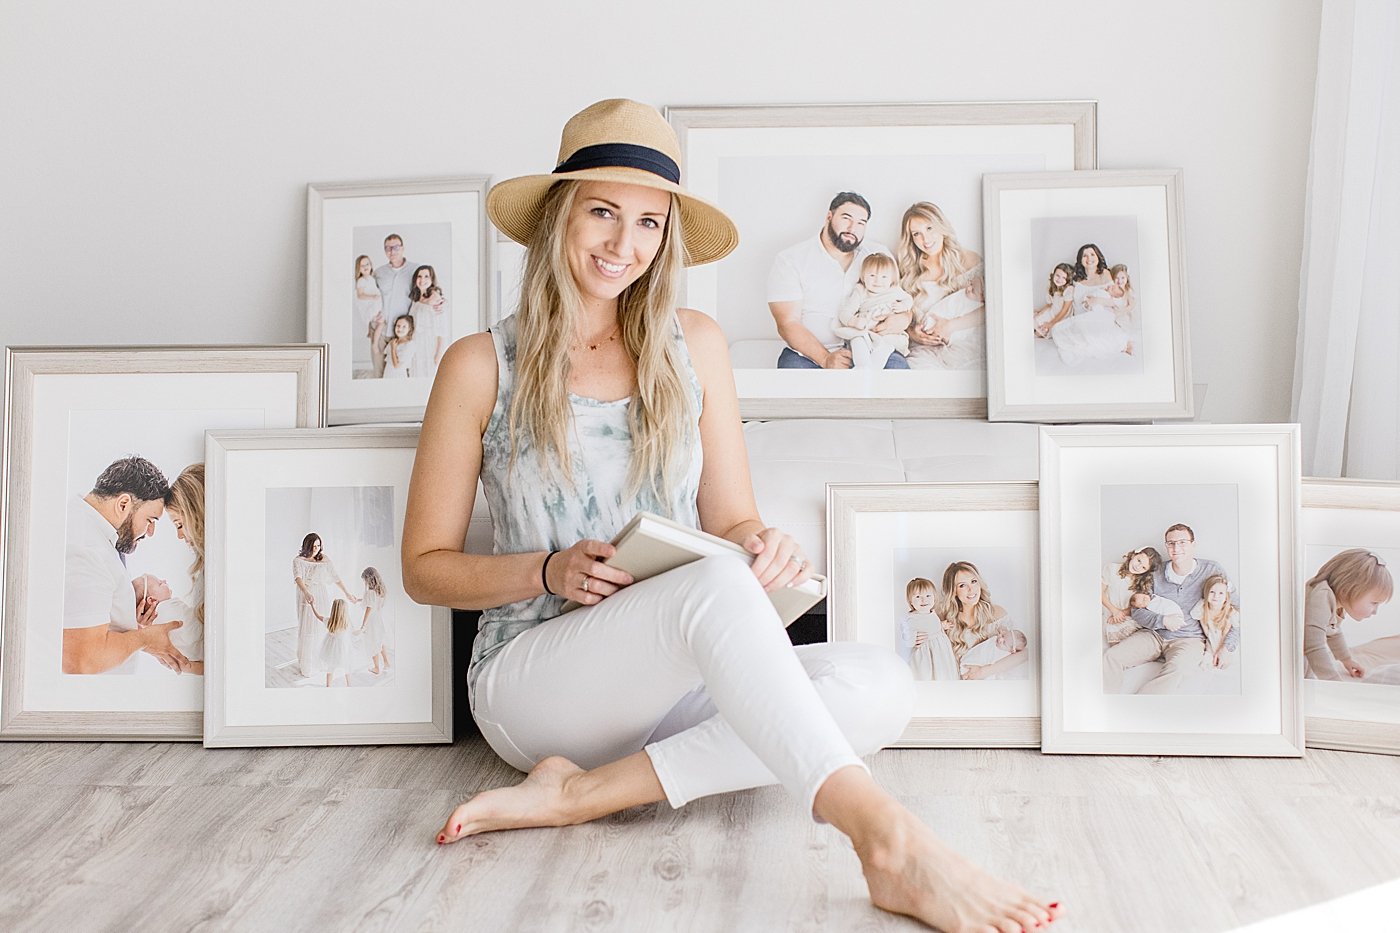 Framed artwork and design with Newport Beach photographer | Ambre Williams Photography